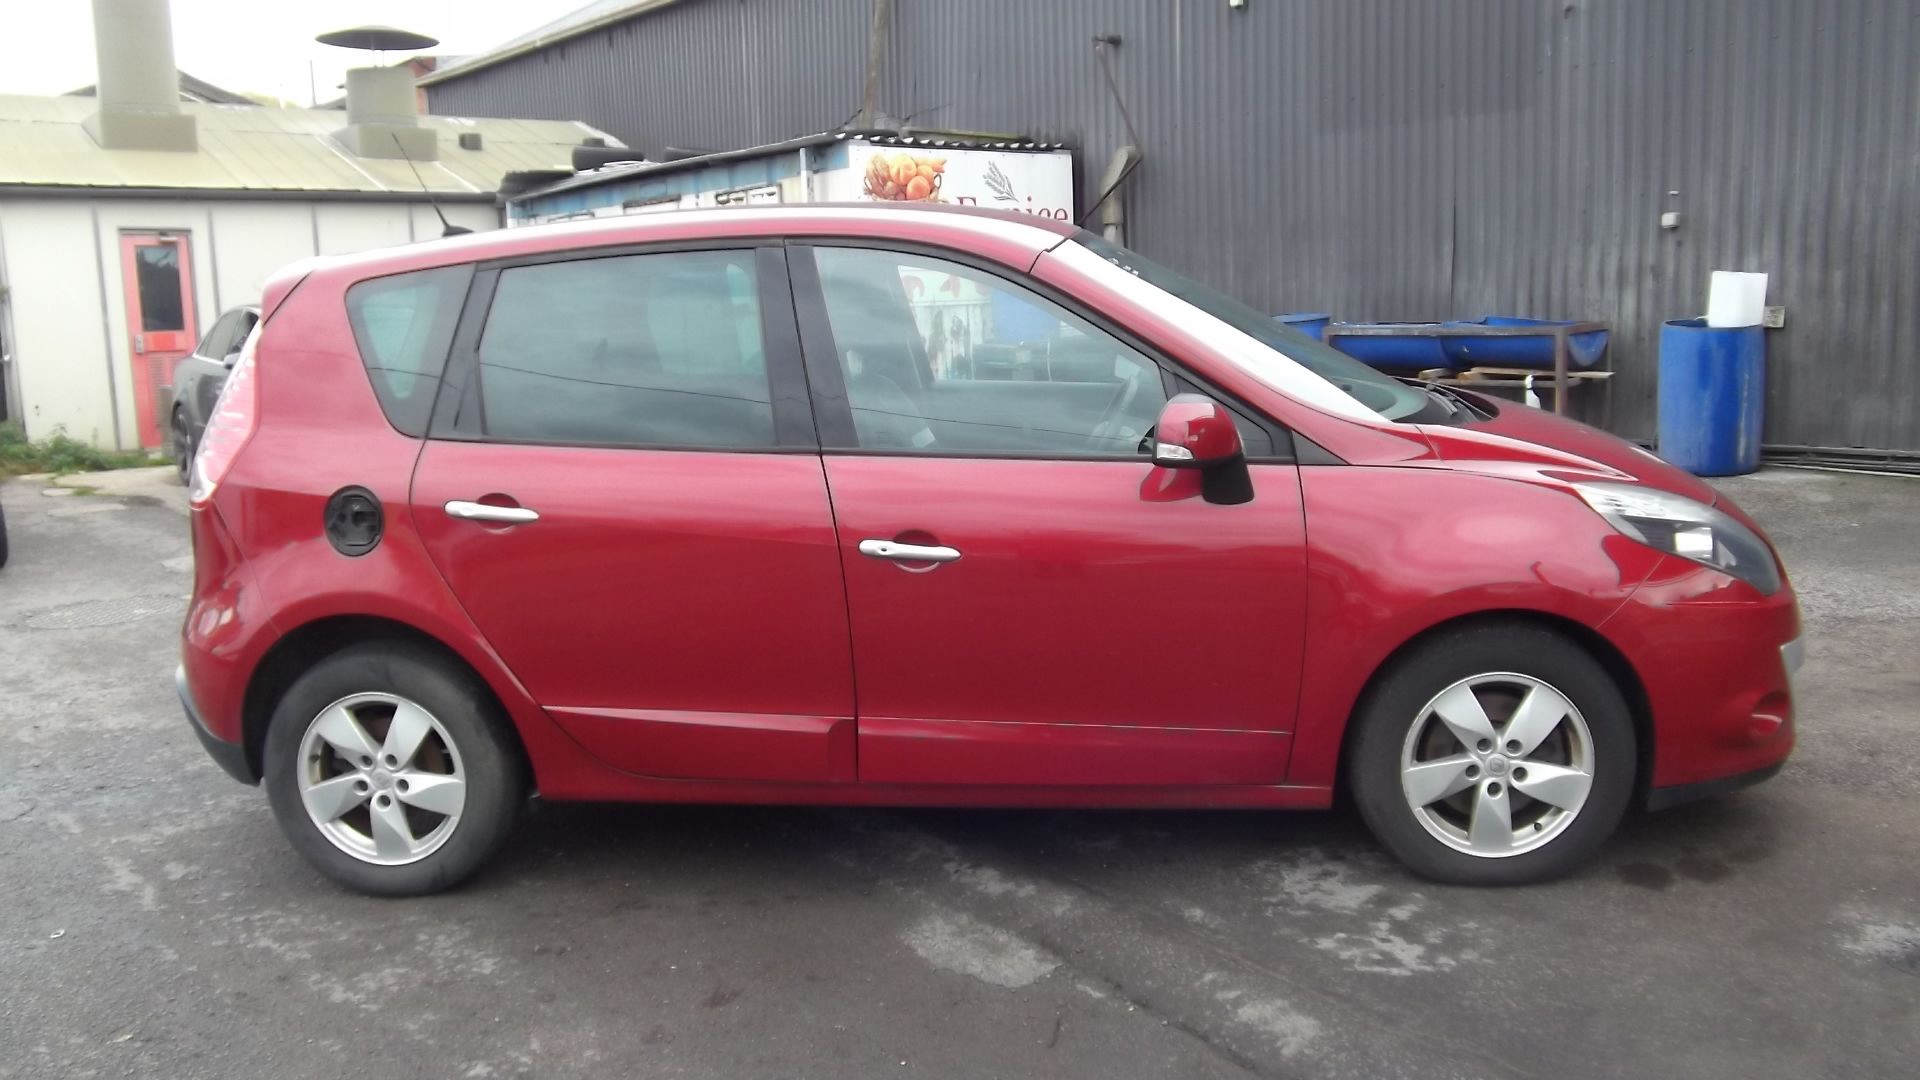 2011 Renault Scenic 1.5 DCI Dynamique Tom Tom 5 Door MPV - Image 4 of 17